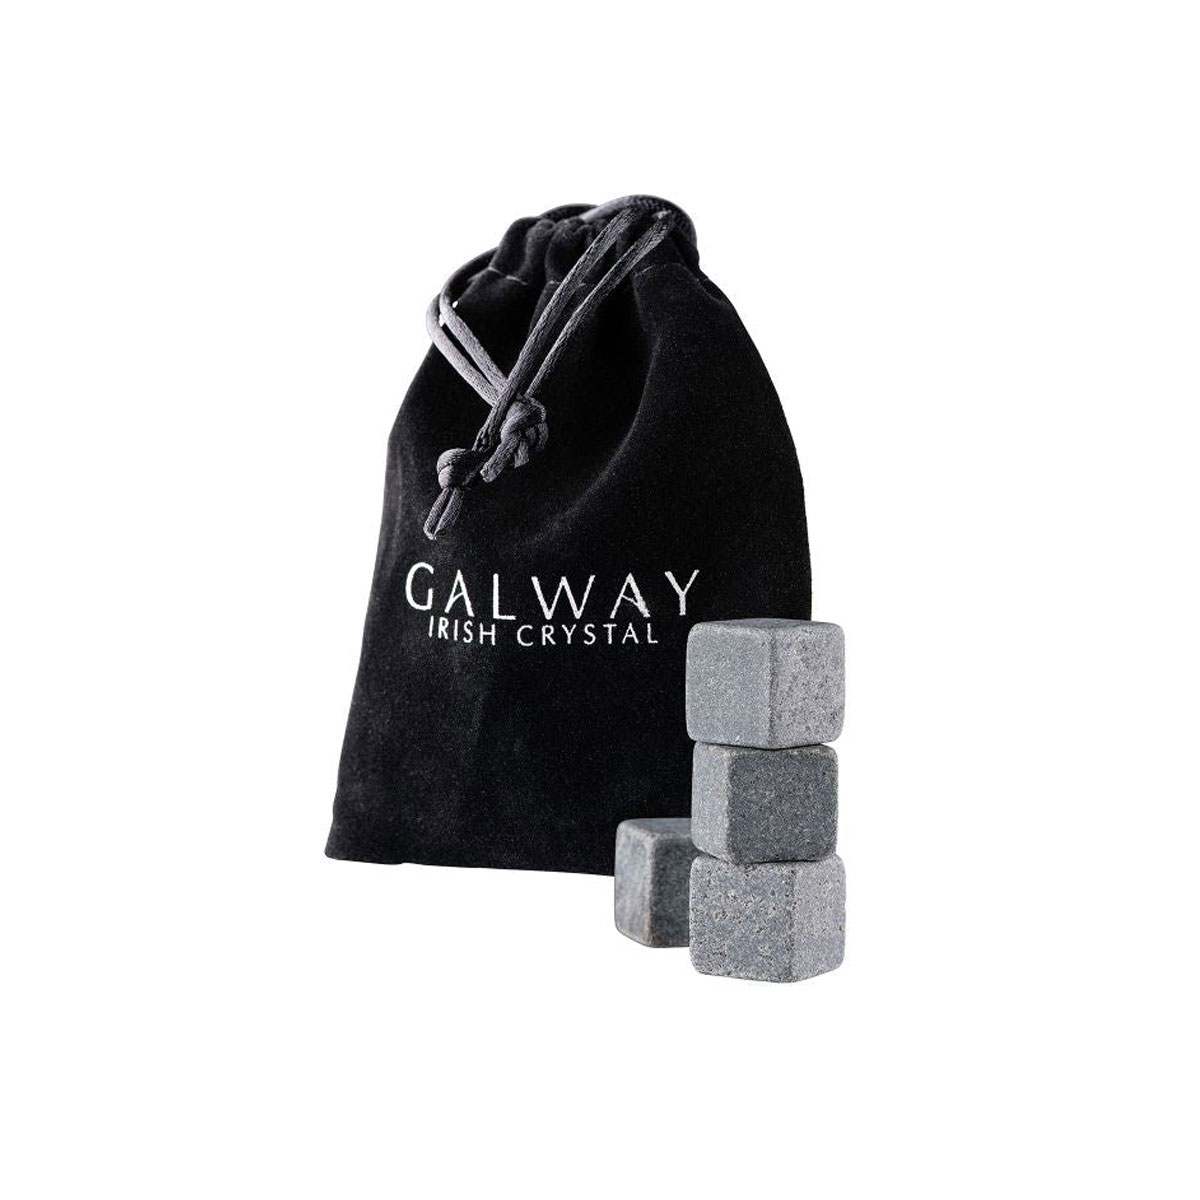 Galway Whiskey Stones, Set of 4